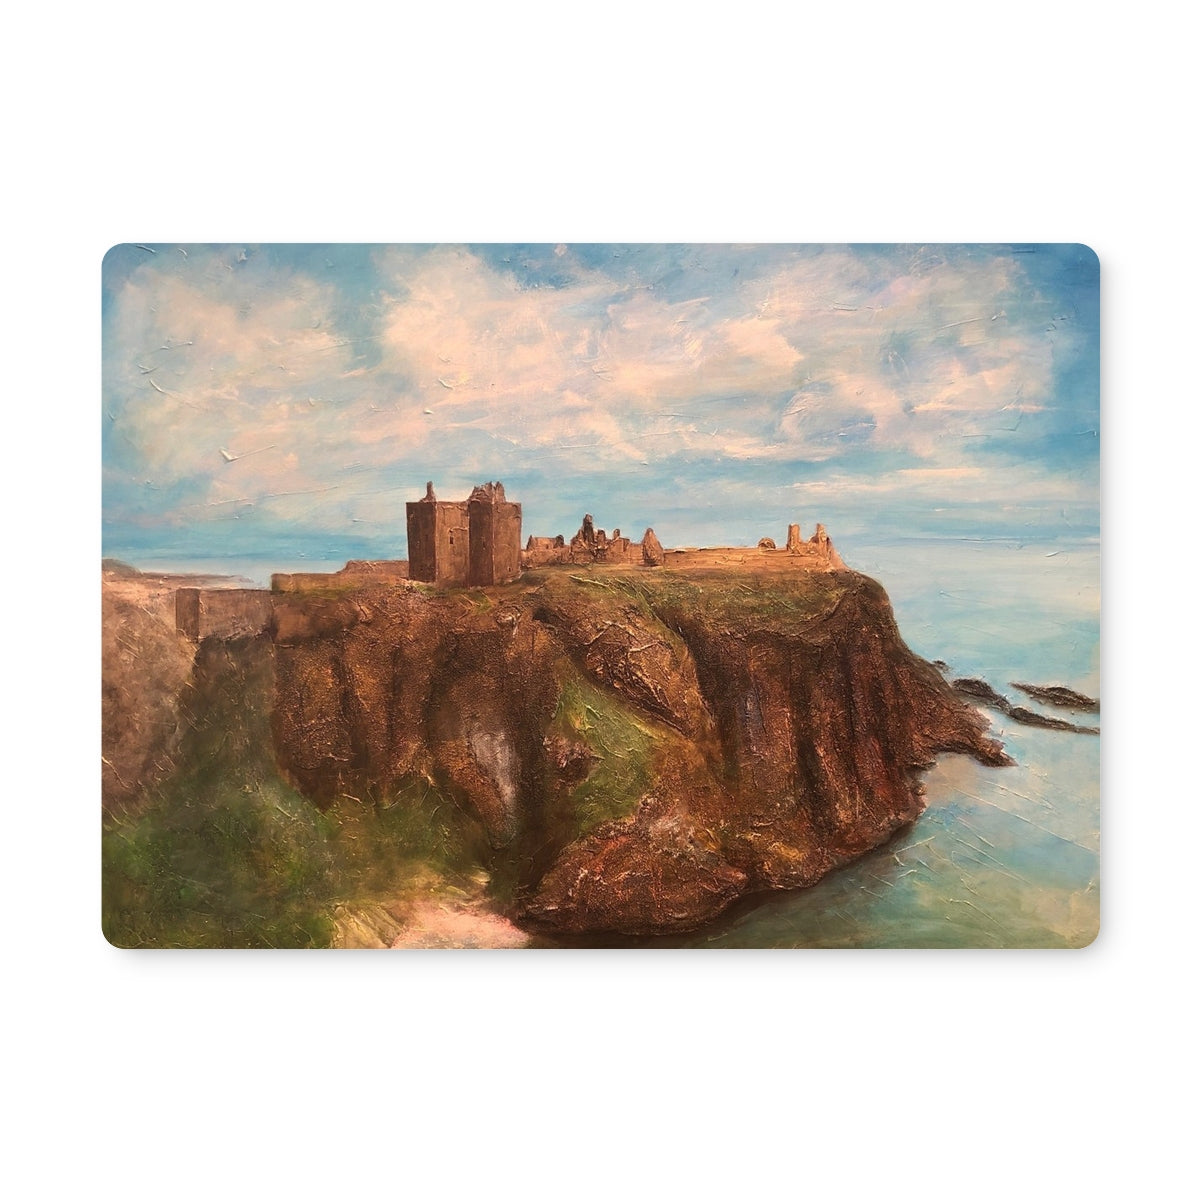 Dunnottar Castle Art Gifts Placemat-Homeware-Prodigi-6 Placemats-Paintings, Prints, Homeware, Art Gifts From Scotland By Scottish Artist Kevin Hunter